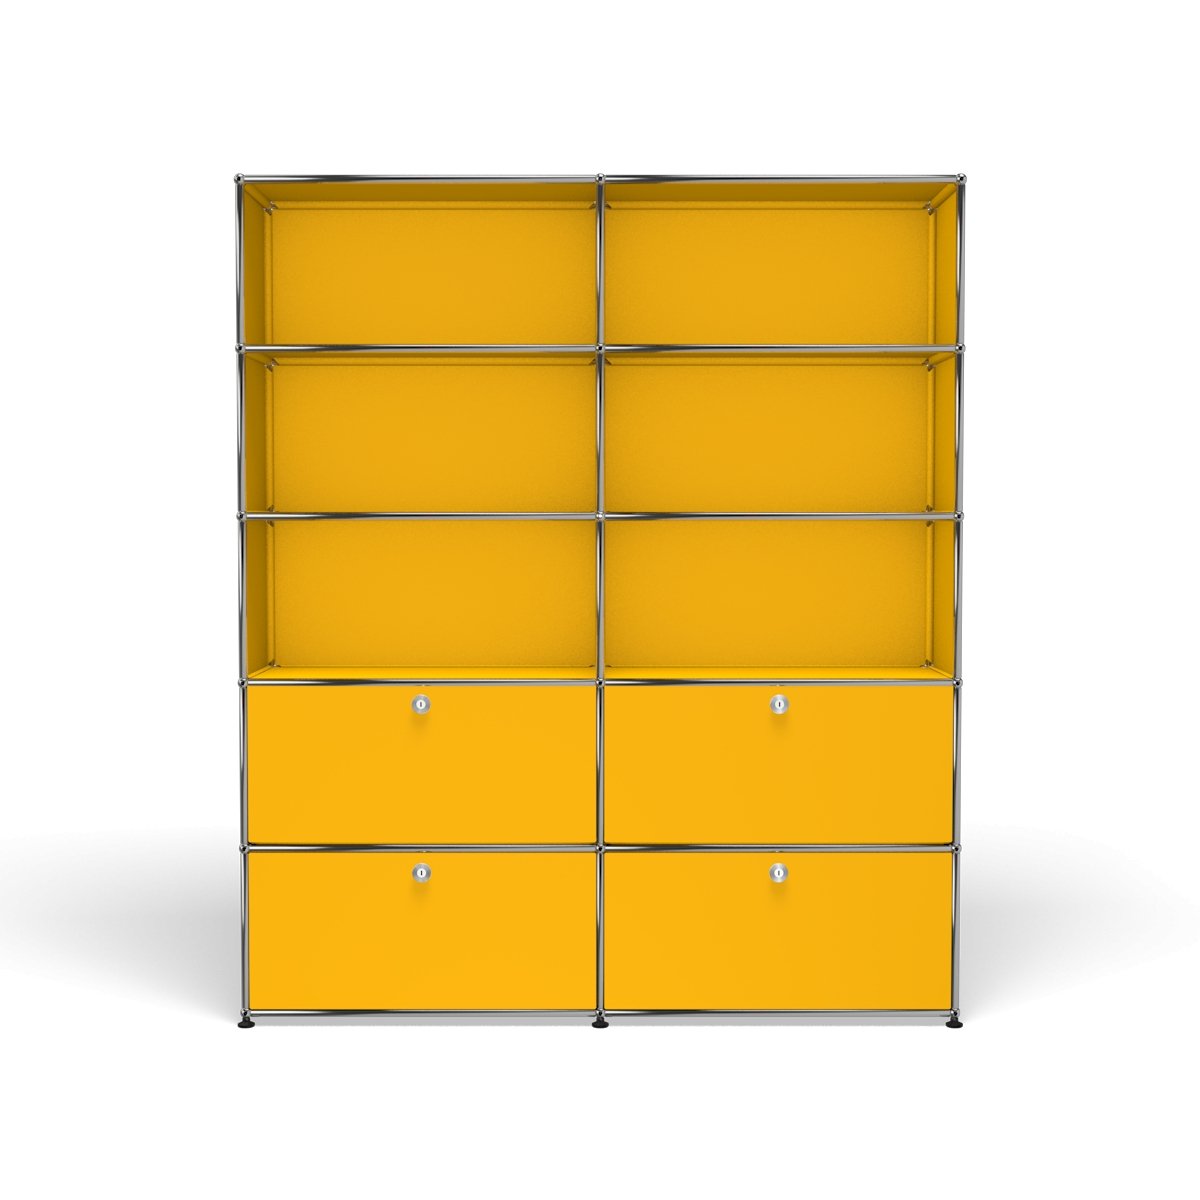 USM Haller Large Contemporary Shelving with Storage (R2) in Golden Yellow